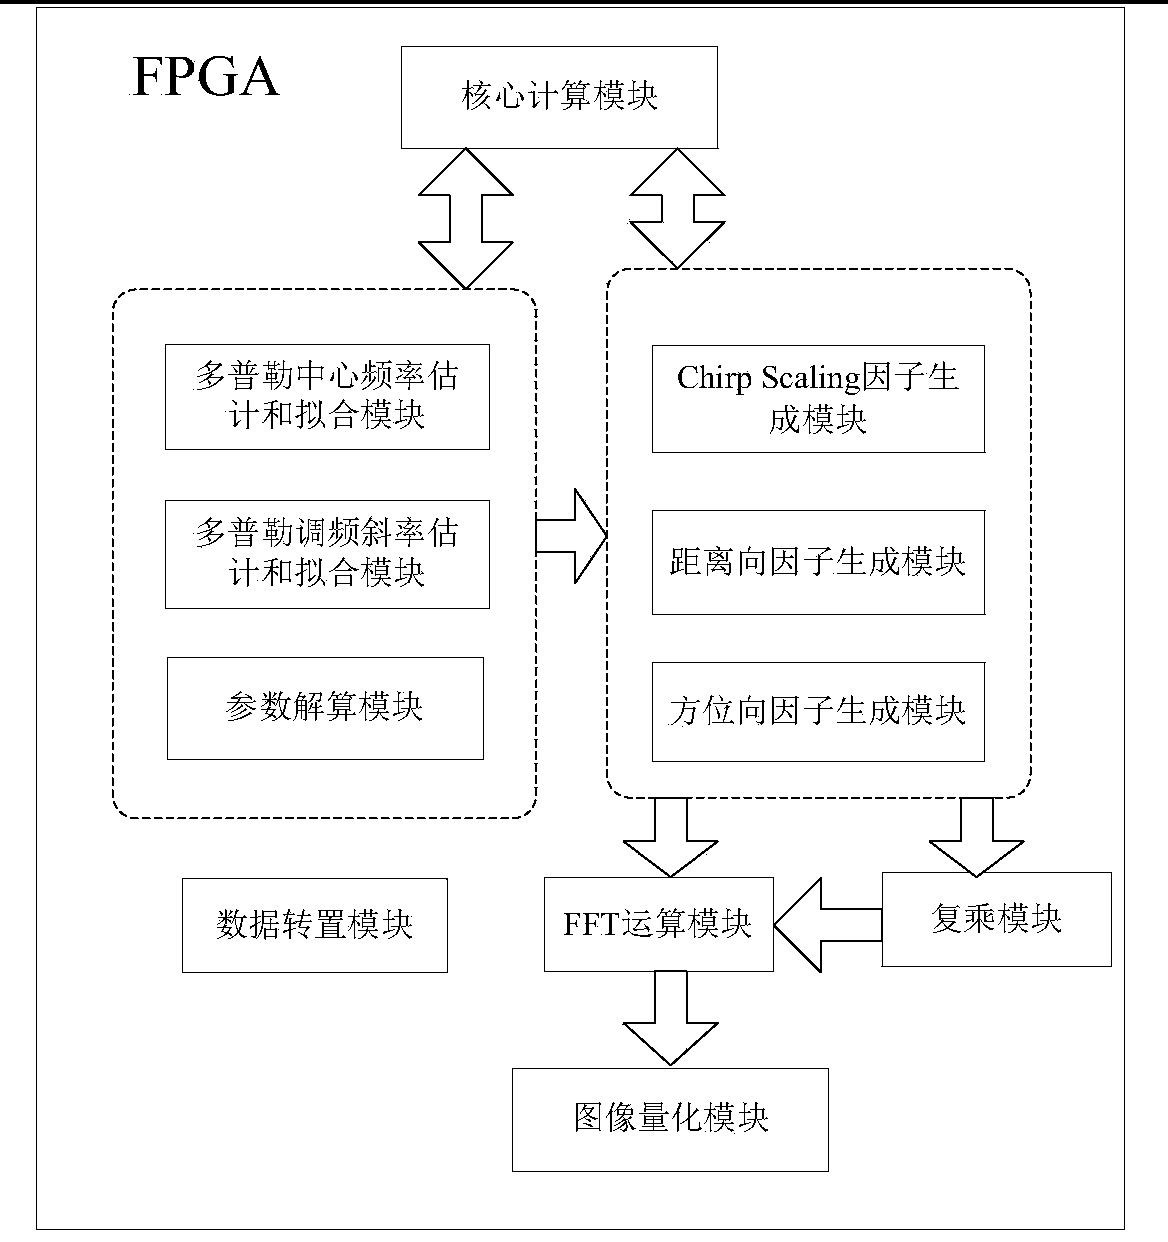 Monolithic FPGA (field programmable gate array) based Chirp Scaling imaging method